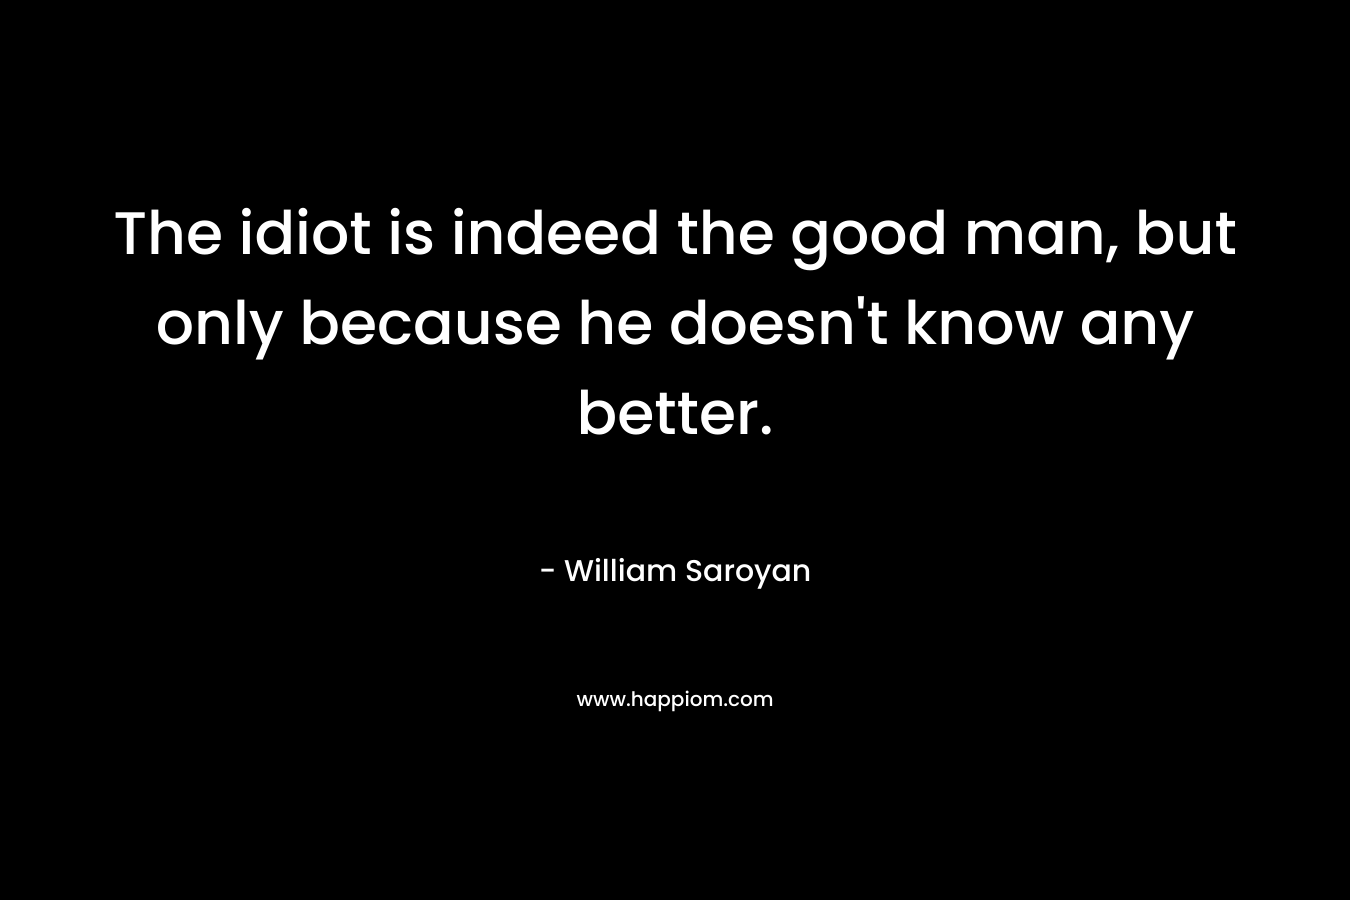 The idiot is indeed the good man, but only because he doesn’t know any better. – William Saroyan